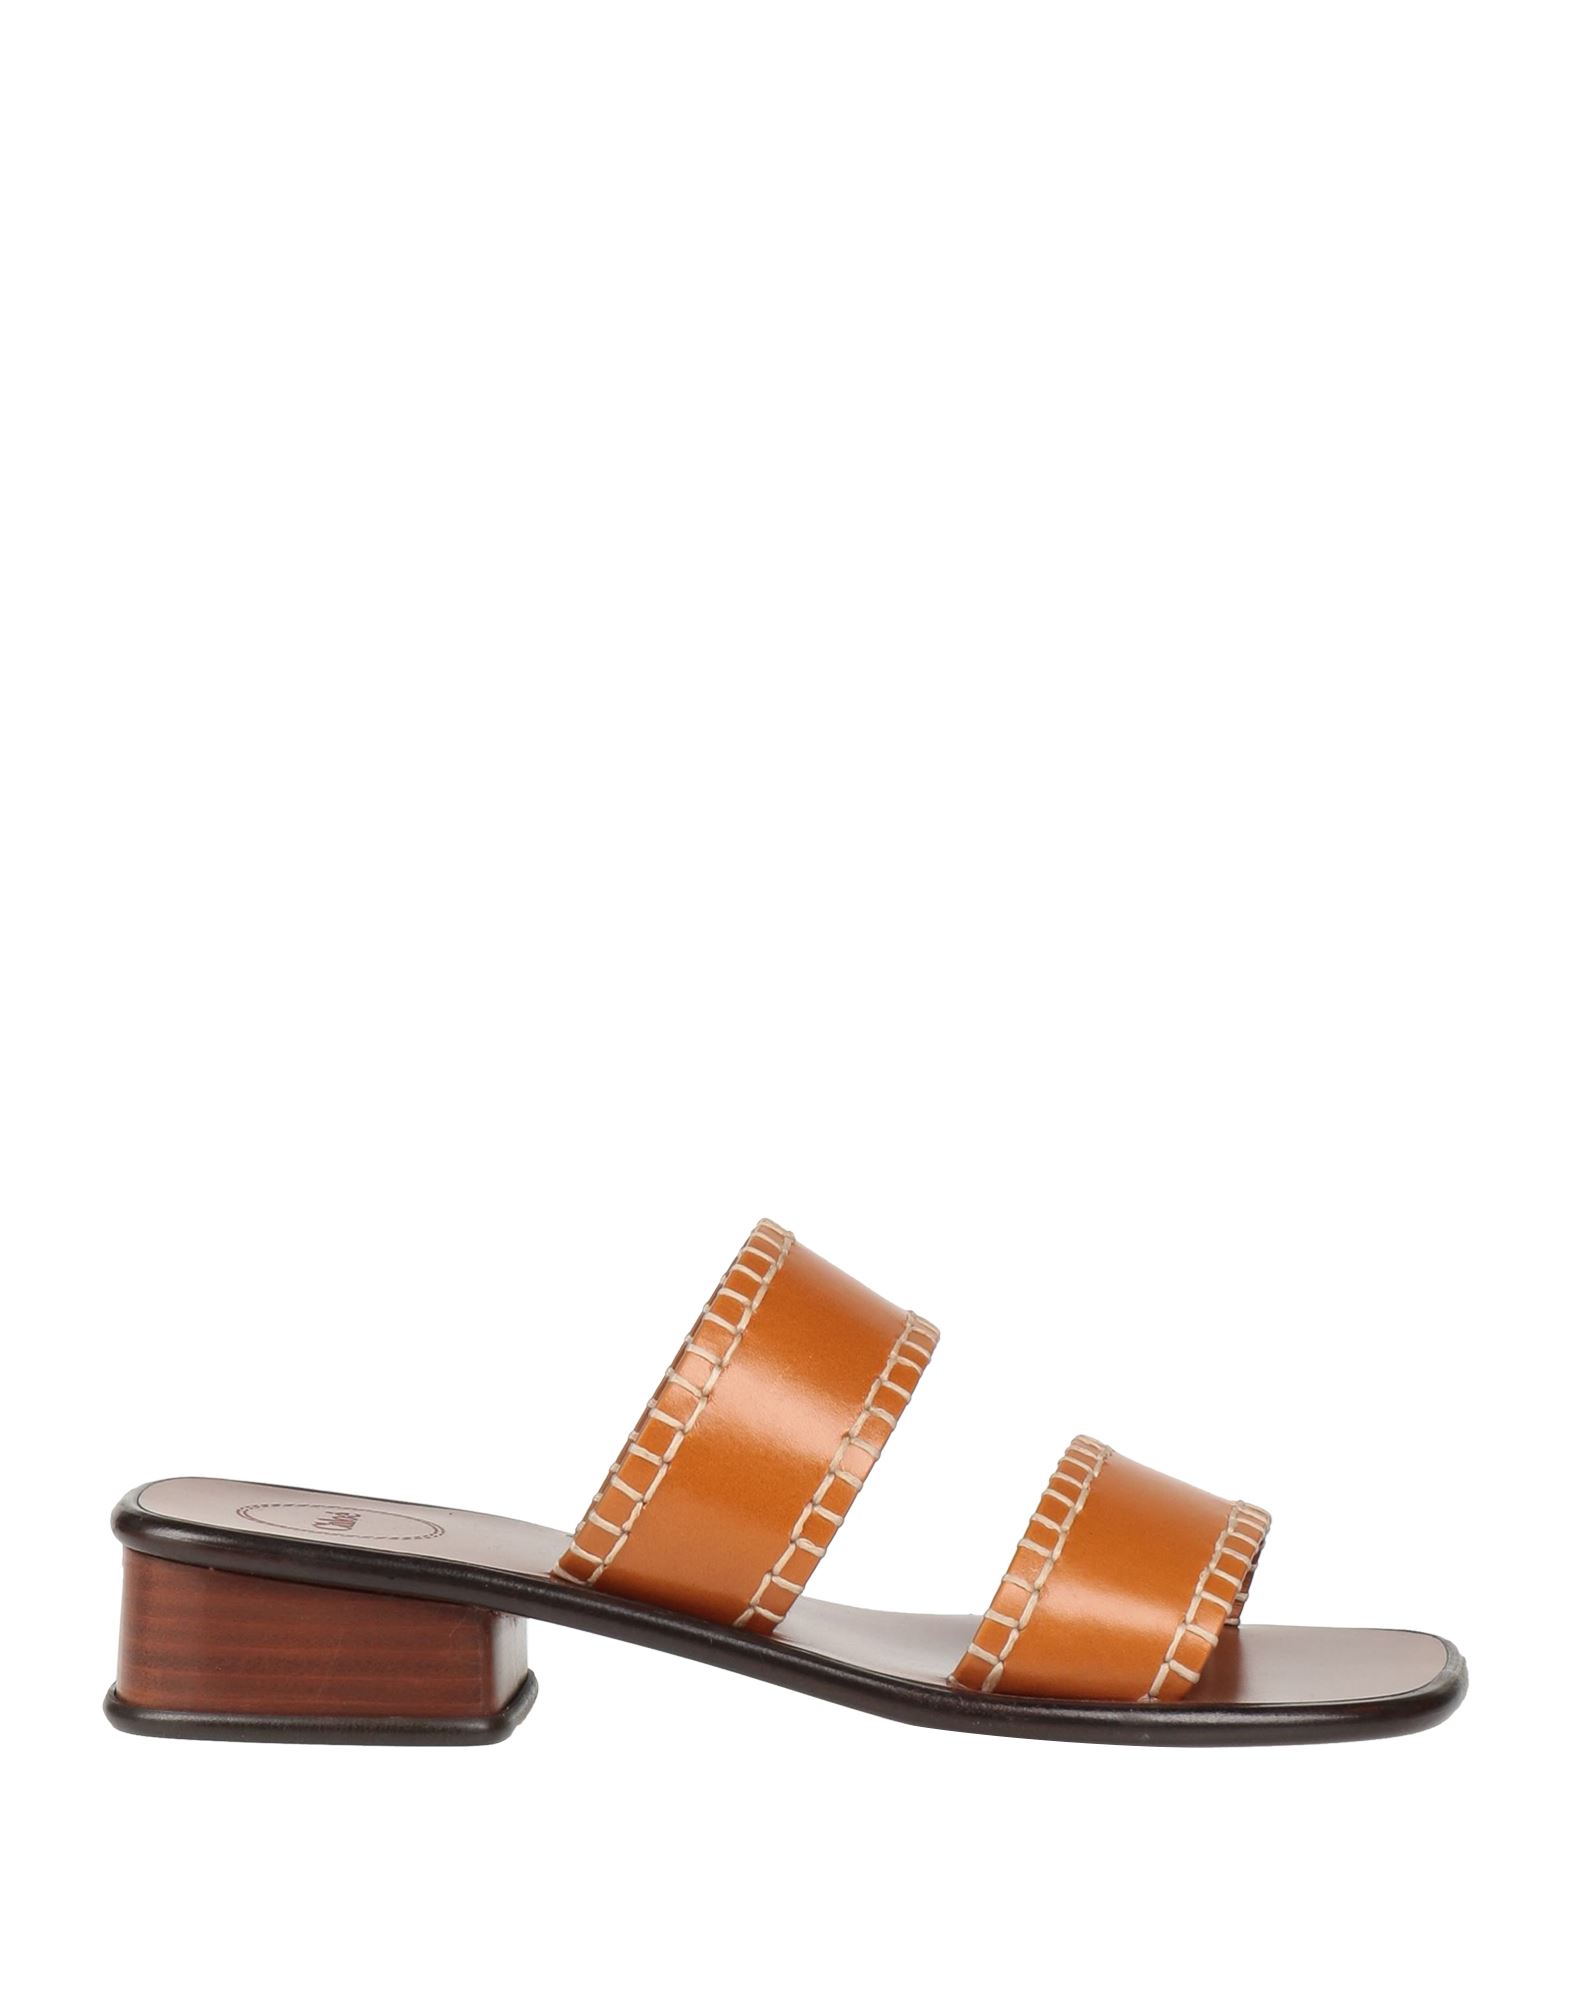 Chloé Woman Sandals Tan Size 8 Soft Leather In Brown